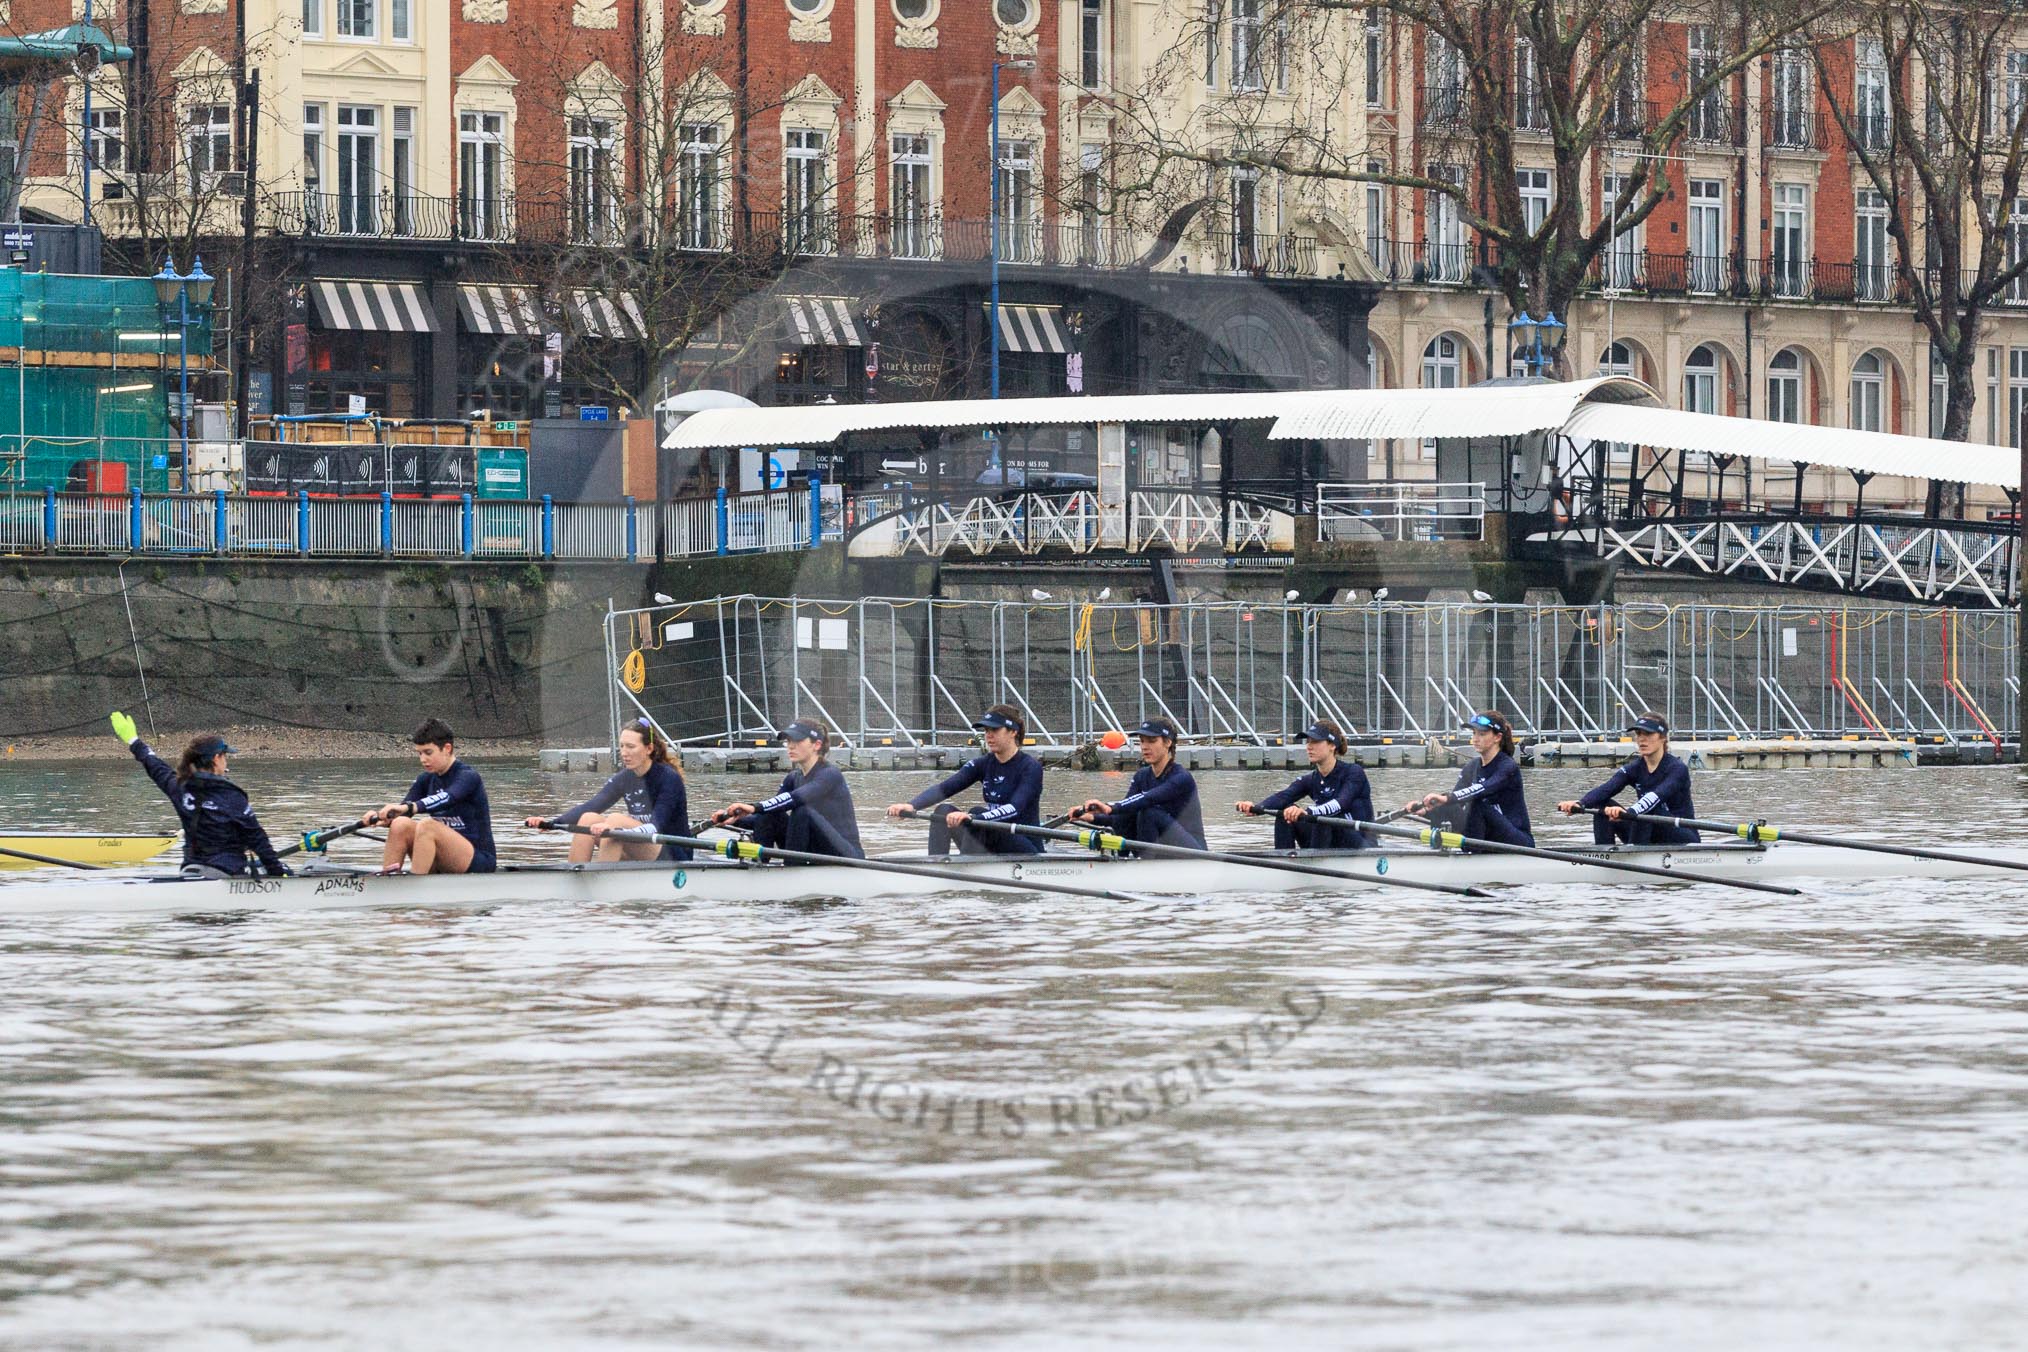 The Boat Race season 2018 - Women's Boat Race Trial Eights (OUWBC, Oxford): Getting ready for the start of the race - "Great Typhoon" with cox Jessica Buck, stroke Alice Roberts,  7 Abigail Killen, 6 Sara Kushma, 5 Olivia Pryer, 4 Linda Van Bijsterveldt, 3 Madeline Goss, 2 Laura Depner, bow Matilda Edwards.
River Thames between Putney Bridge and Mortlake,
London SW15,

United Kingdom,
on 21 January 2018 at 14:26, image #44